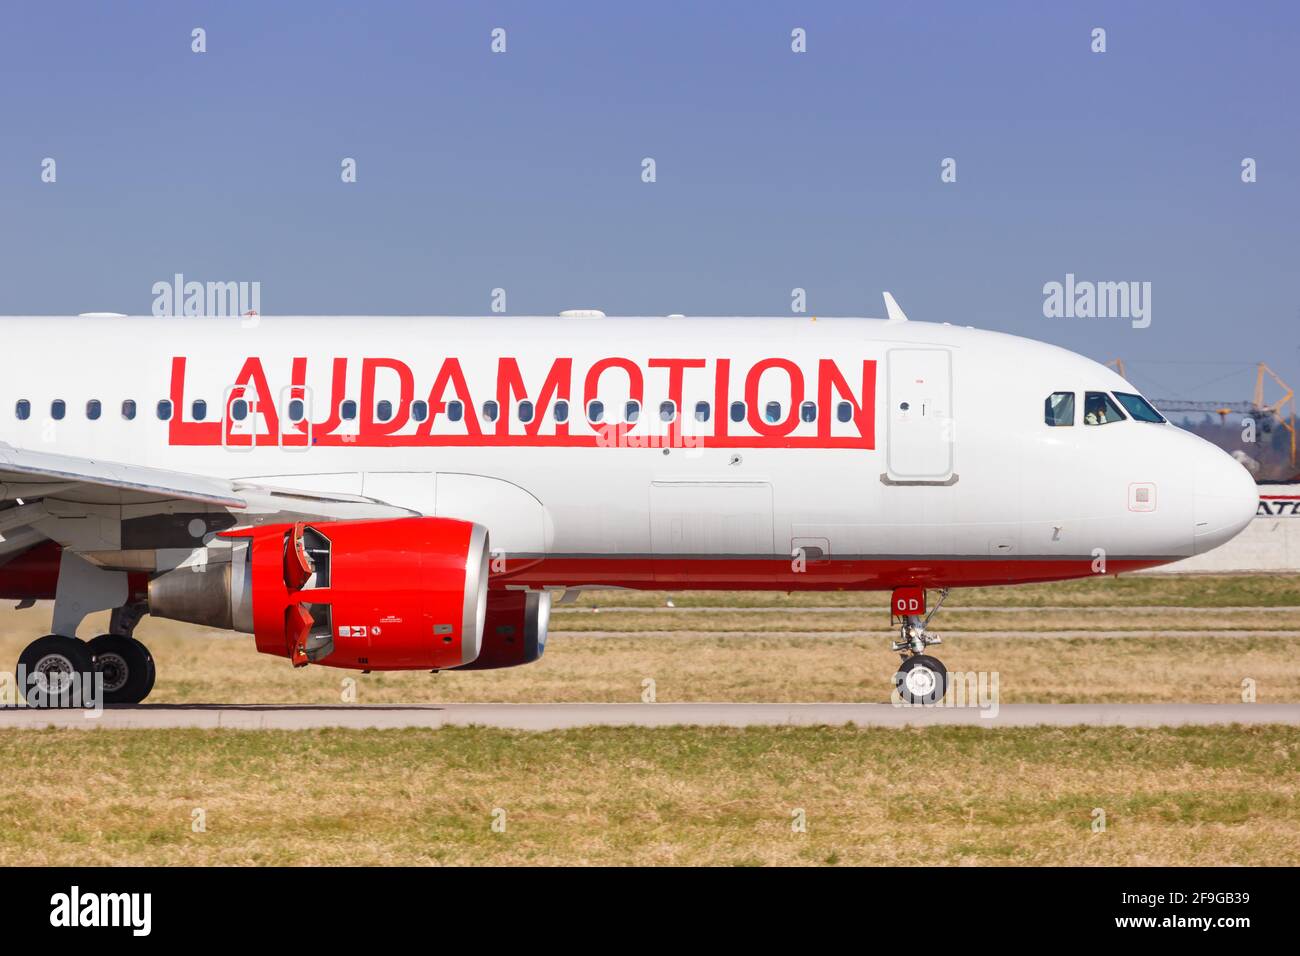 Stuttgart, Germany - April 6, 2018: LaudaMotion Airbus A320 airplane at Stuttgart airport (STR) in Germany. Airbus is an aircraft manufacturer from To Stock Photo